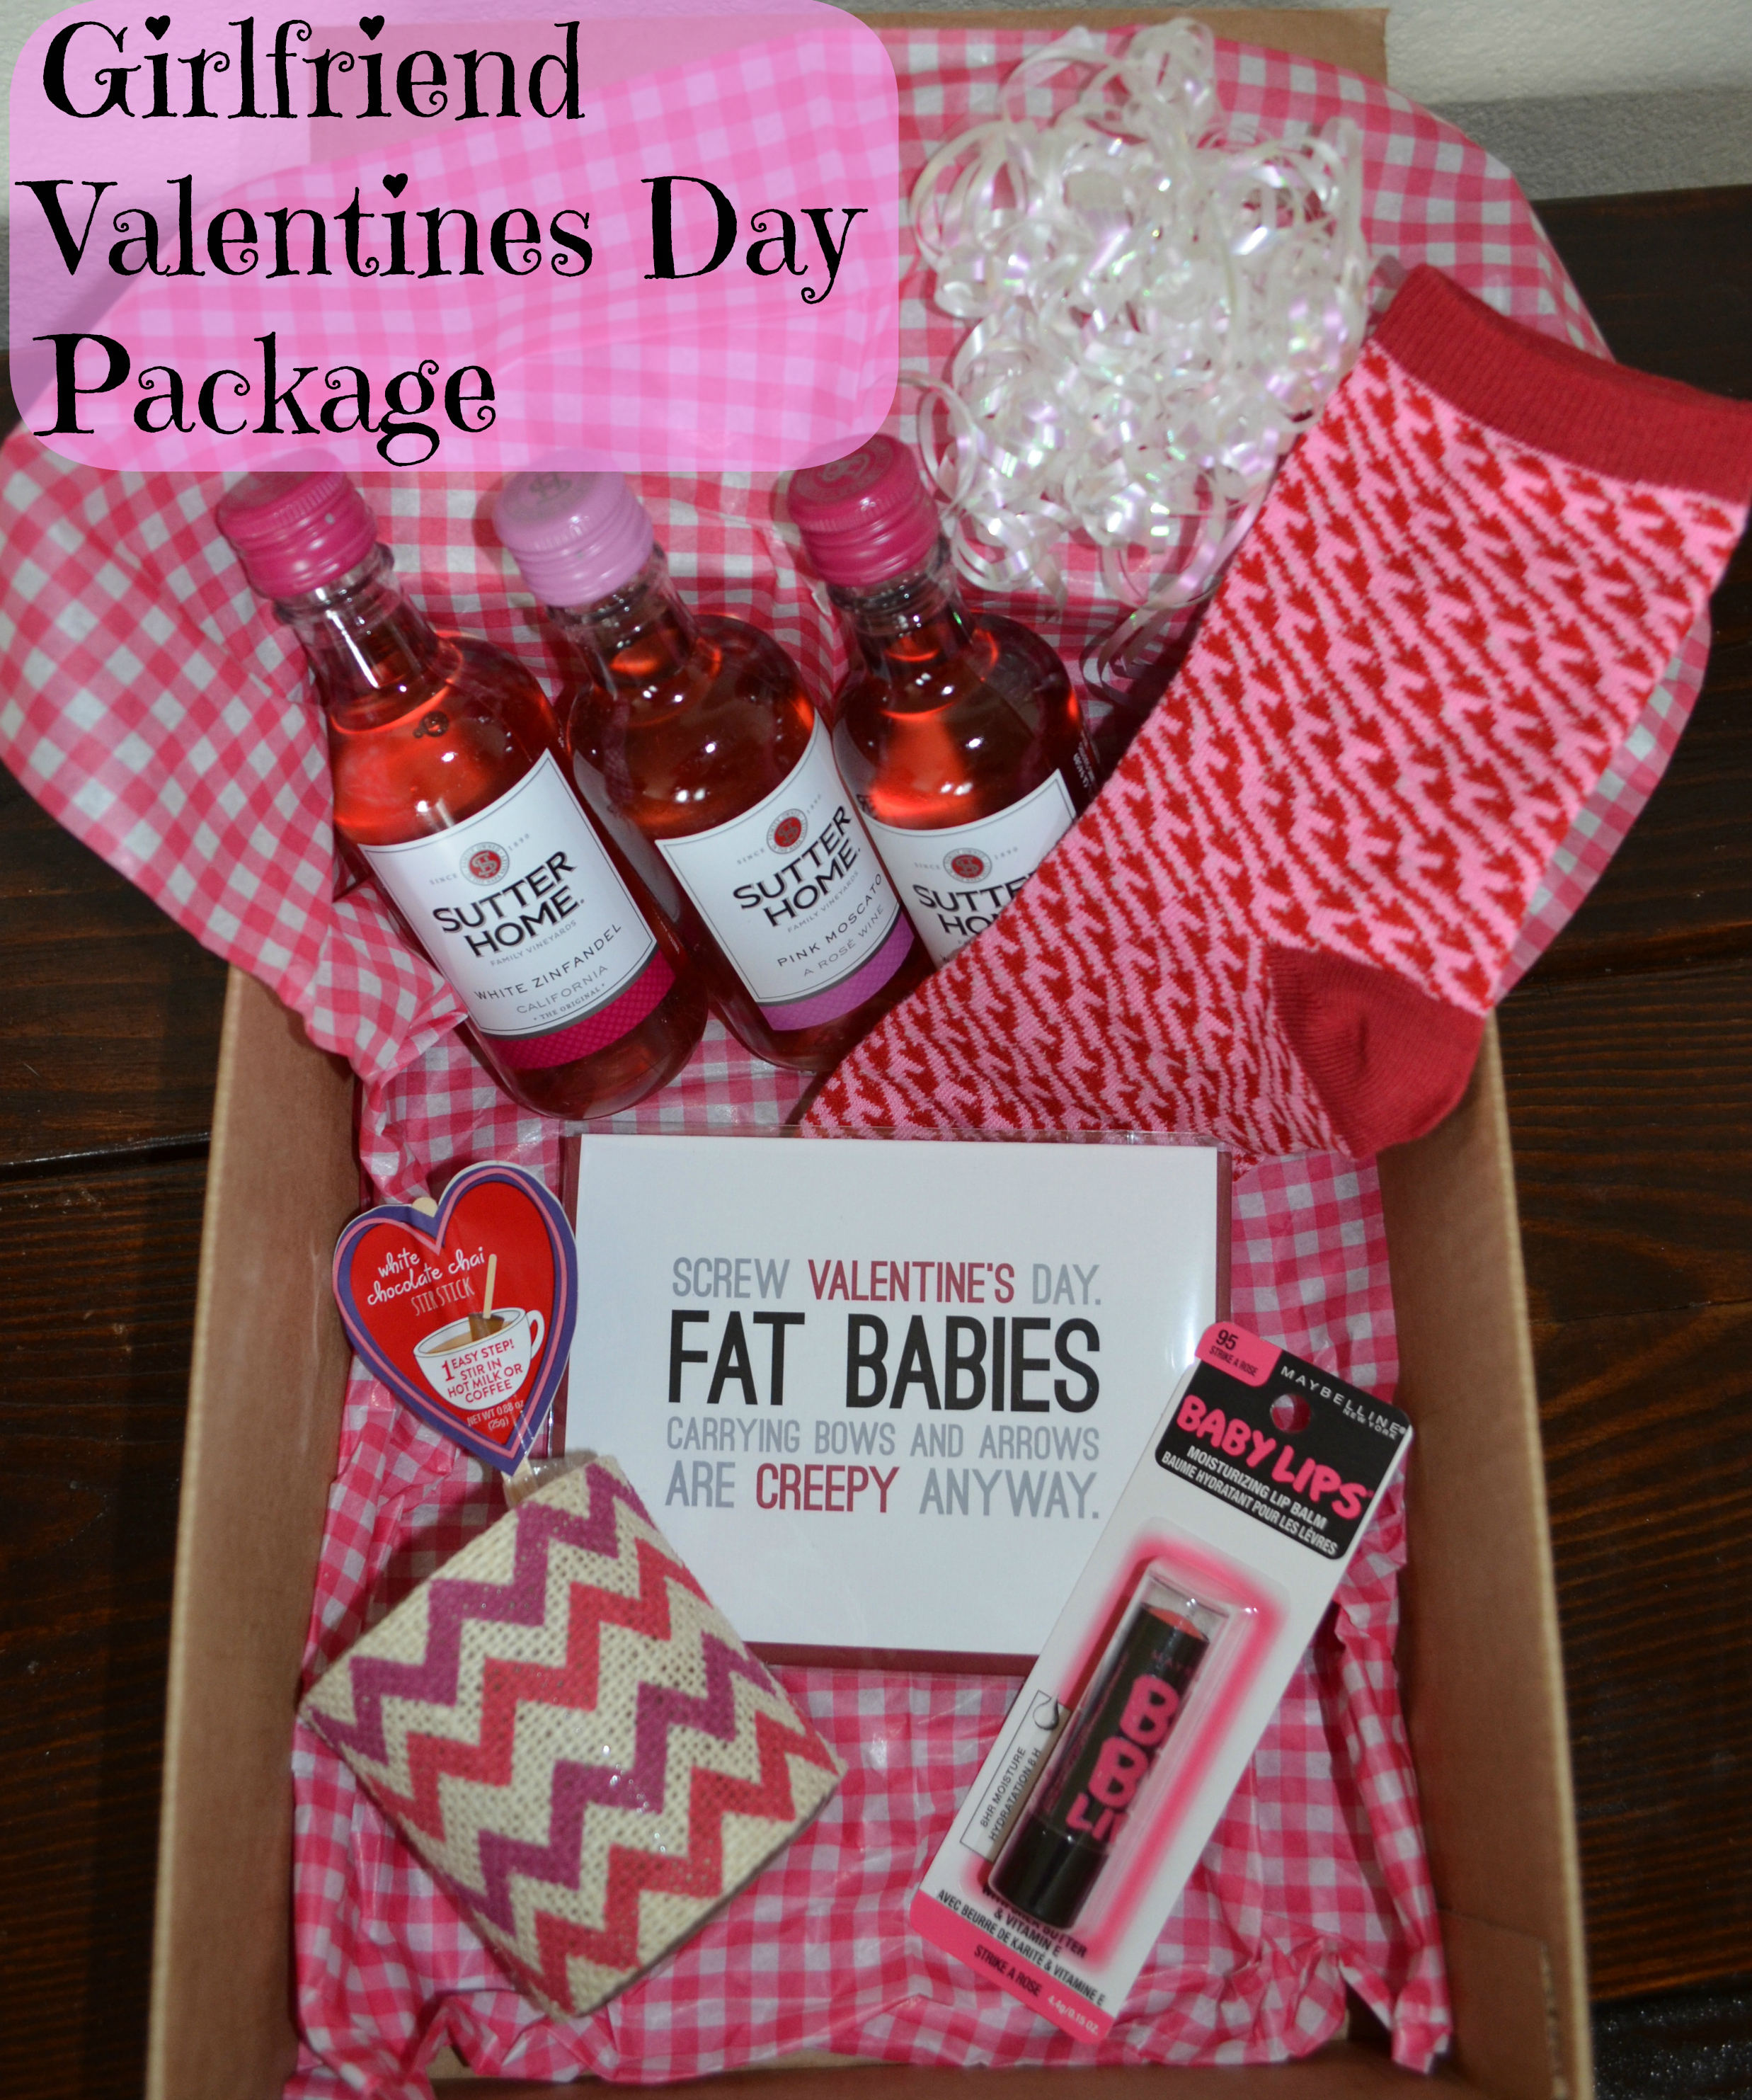 creative valentine's day gifts for girlfriend